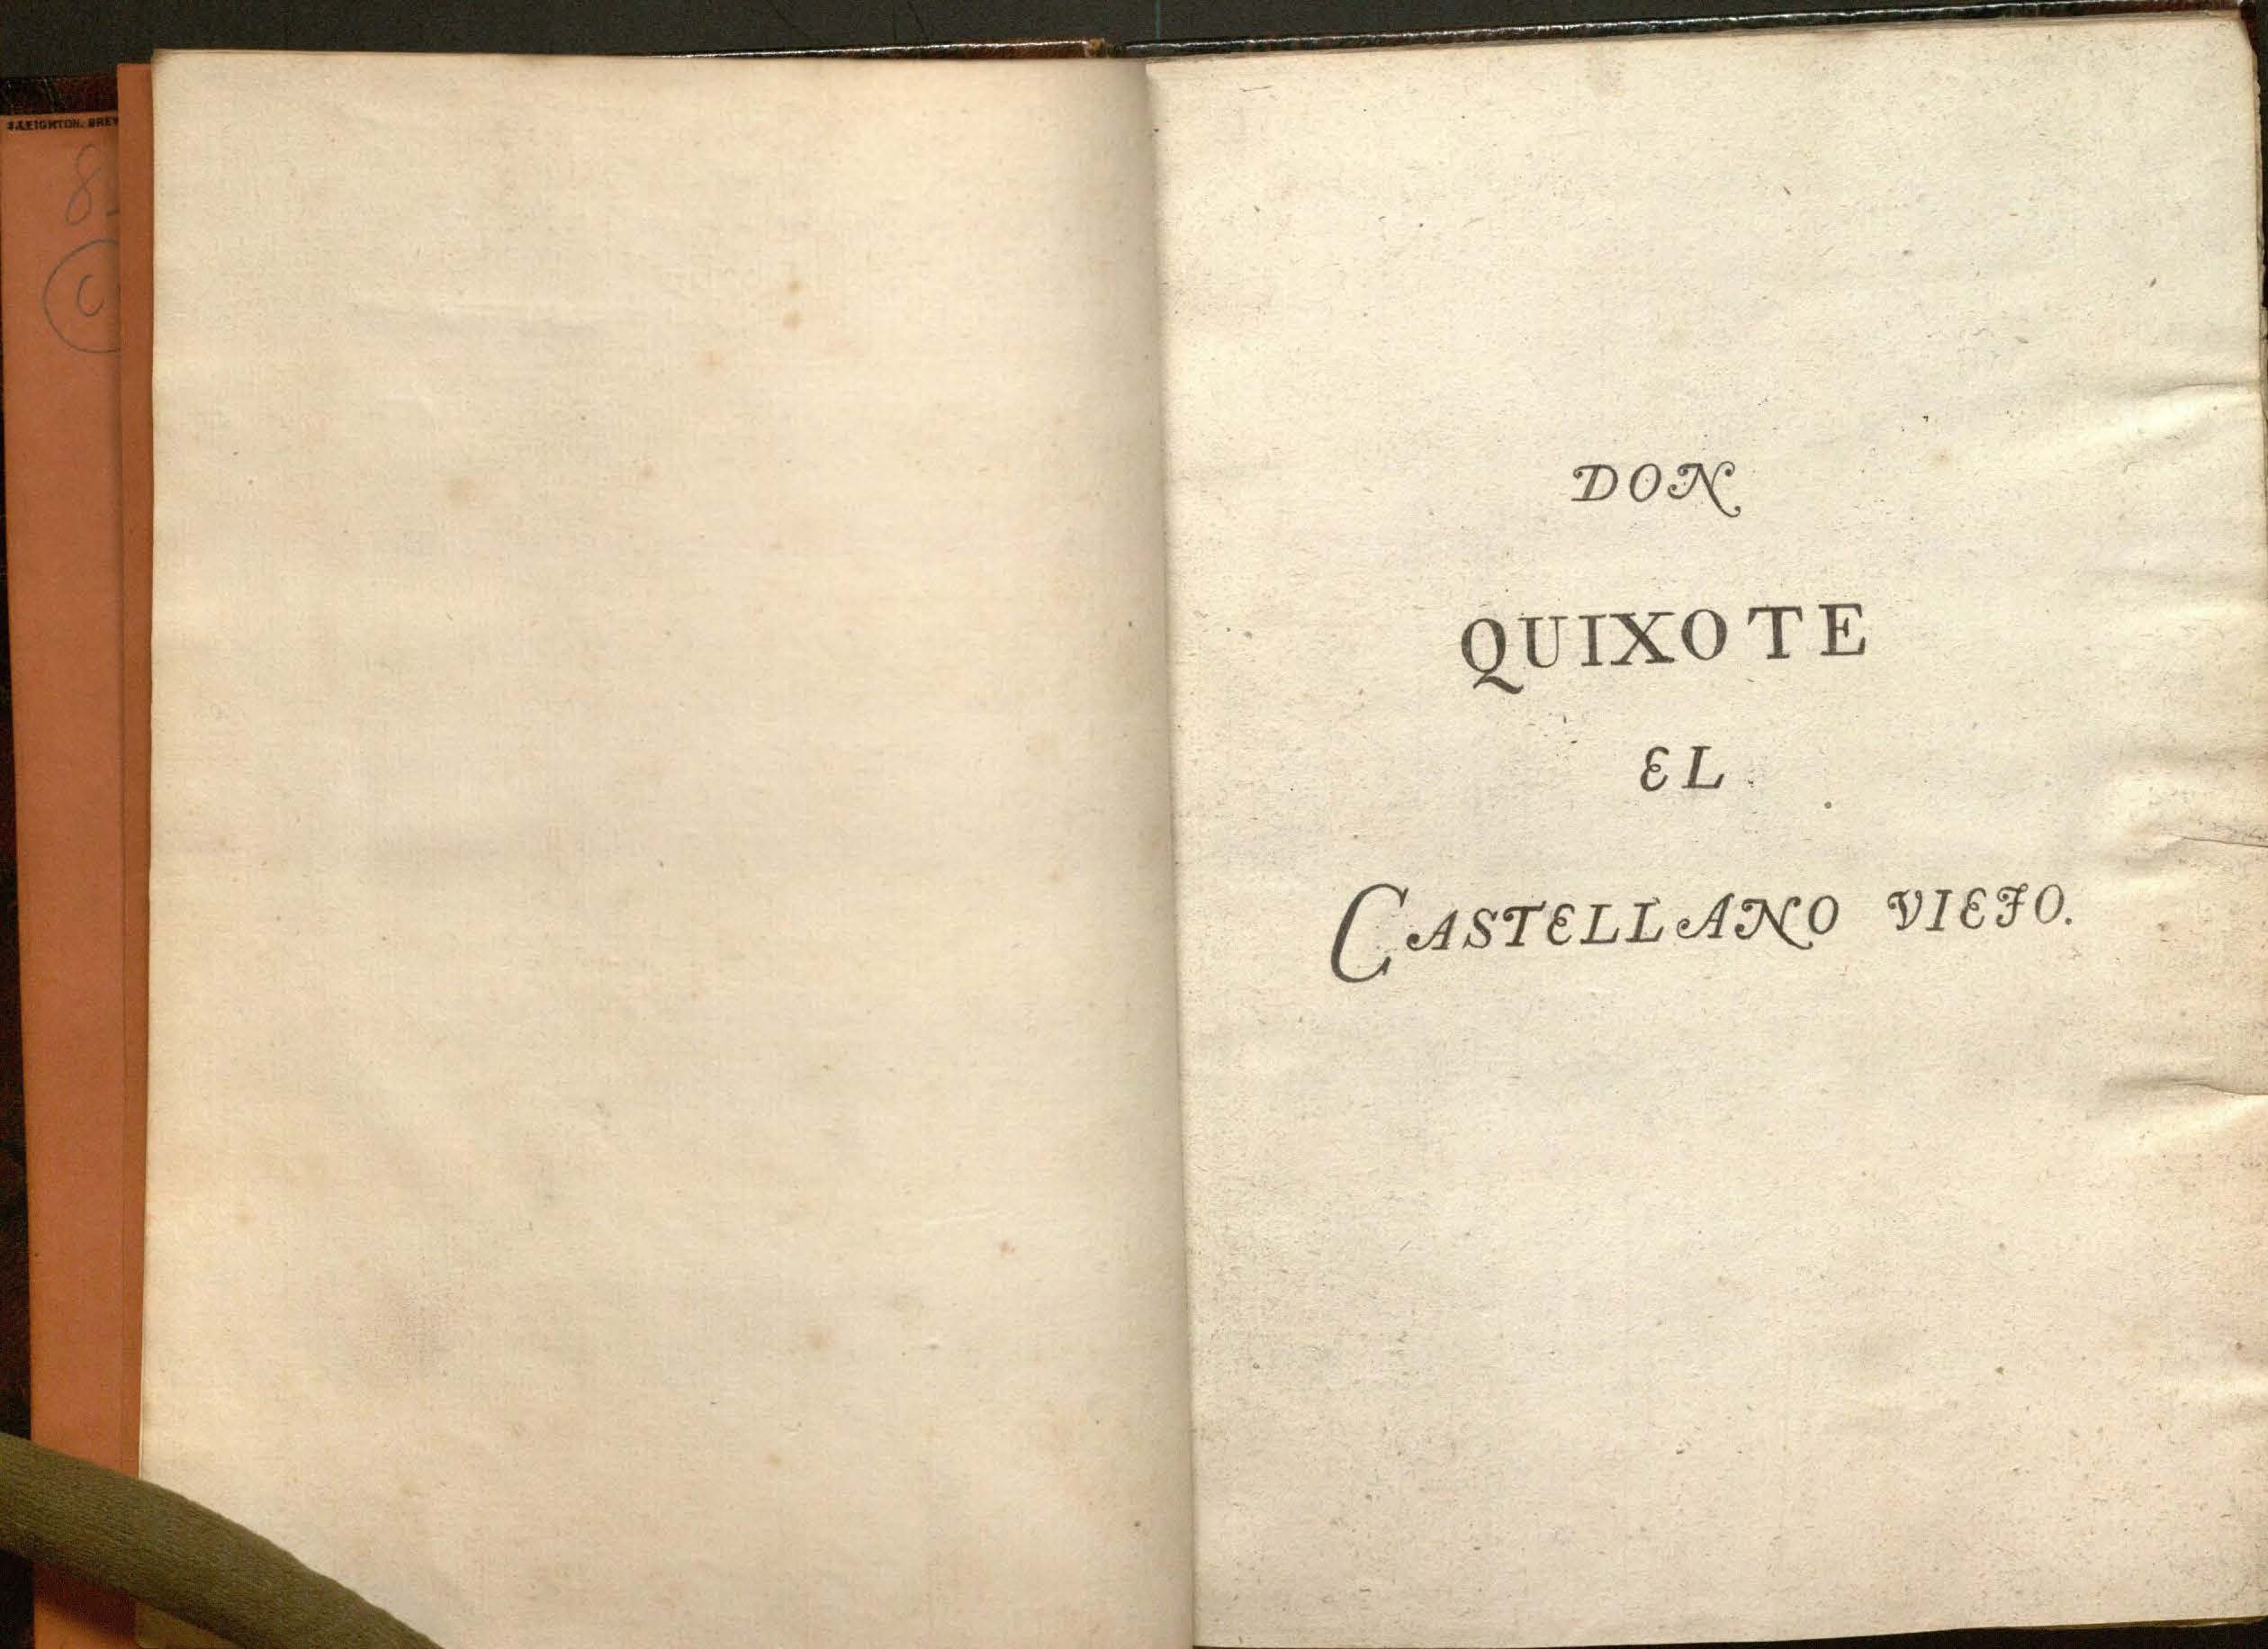 Image of the title page (in a different hand?) giving the title, Don Quixote, el Castellano viejo